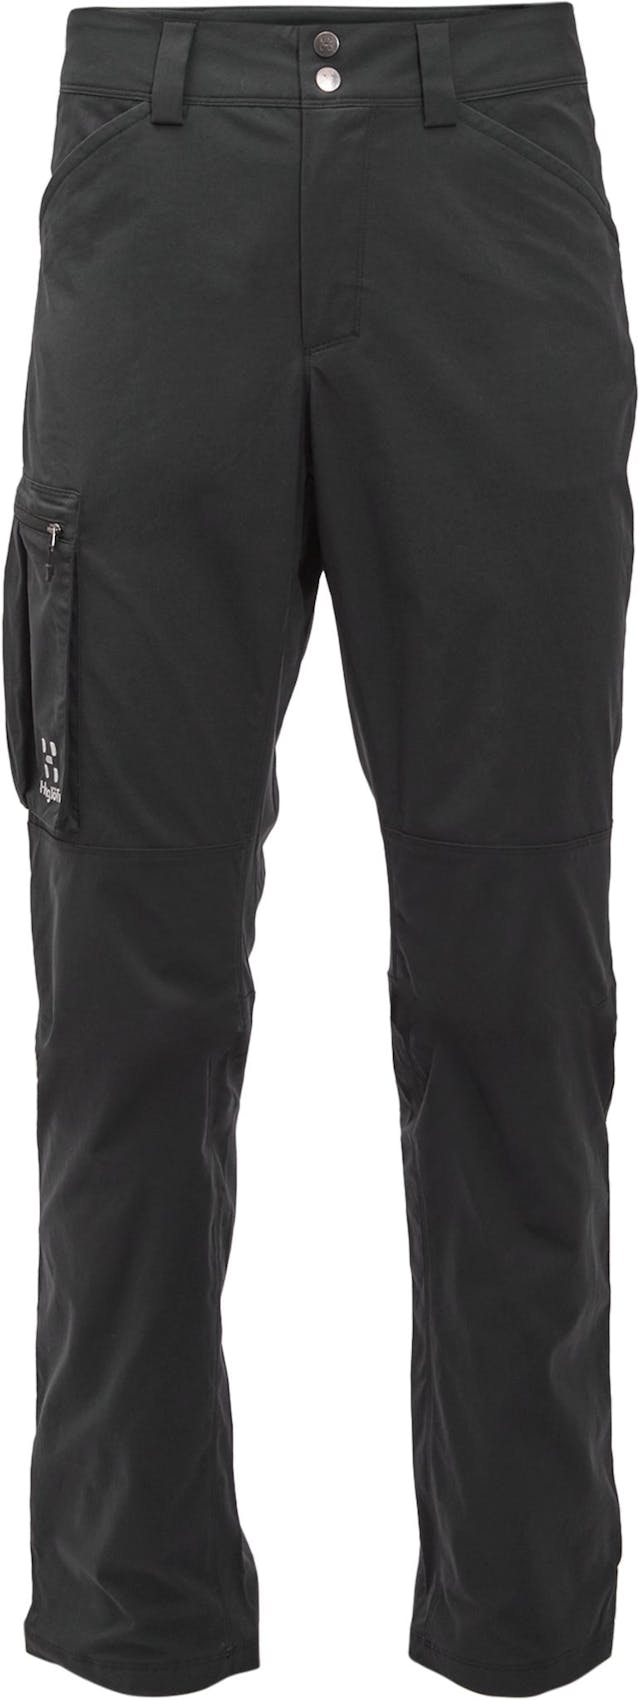 Product image for Mid Forest Pant - Men's